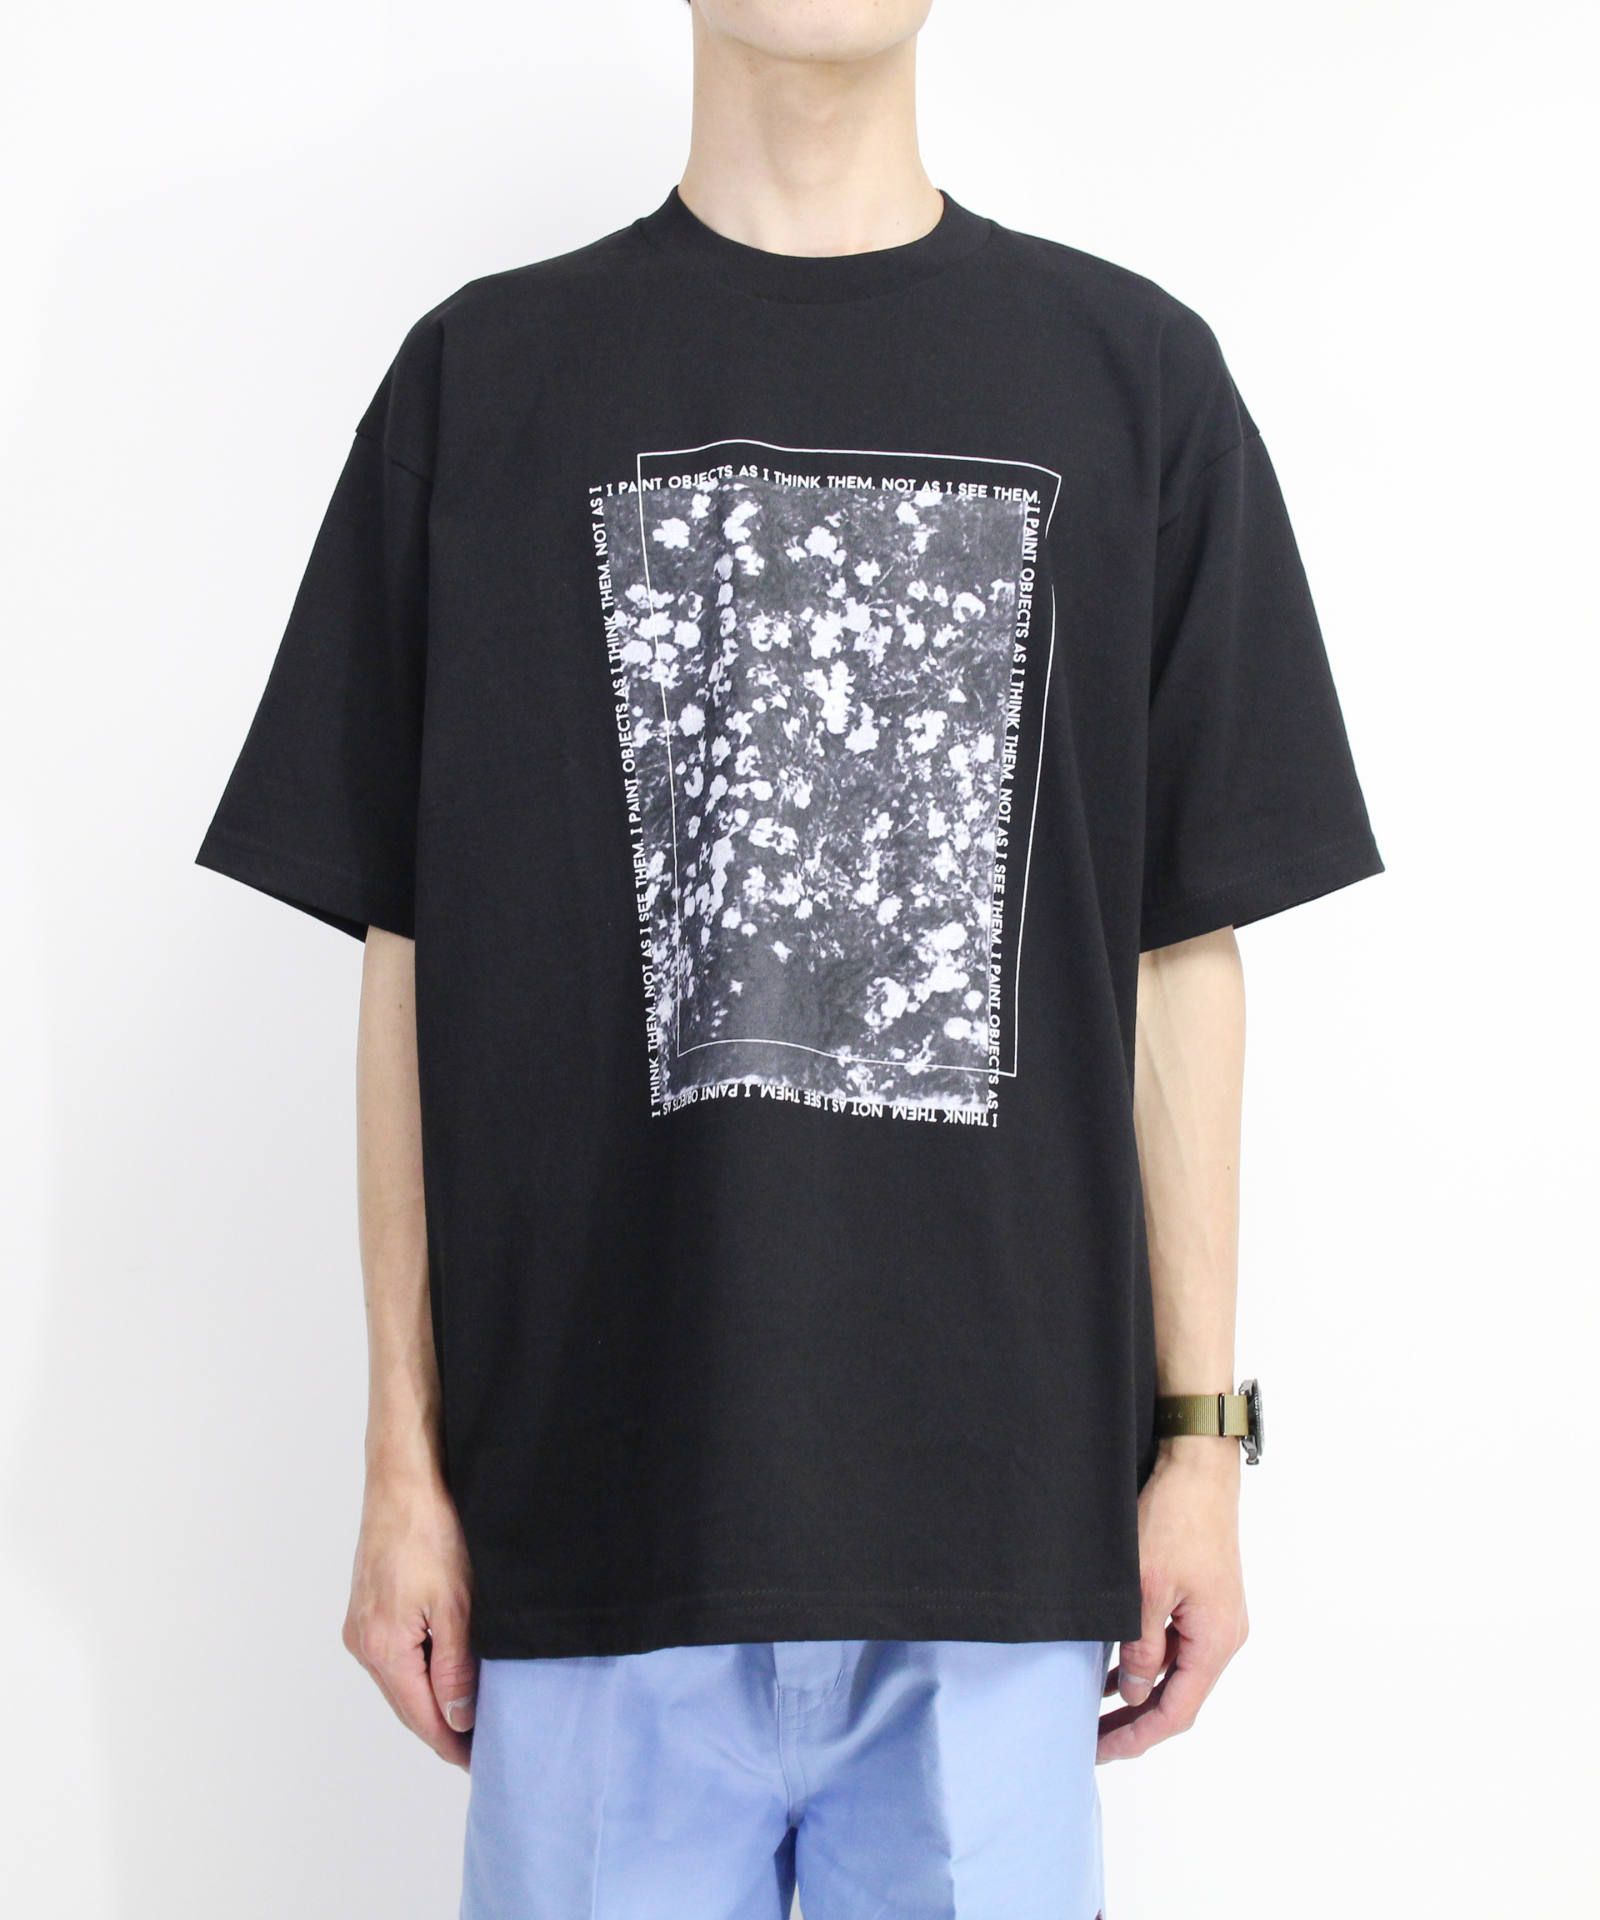 CLANE HOMME - グラフィック プリントTシャツ - GRAPHIC PRINT T/S ...